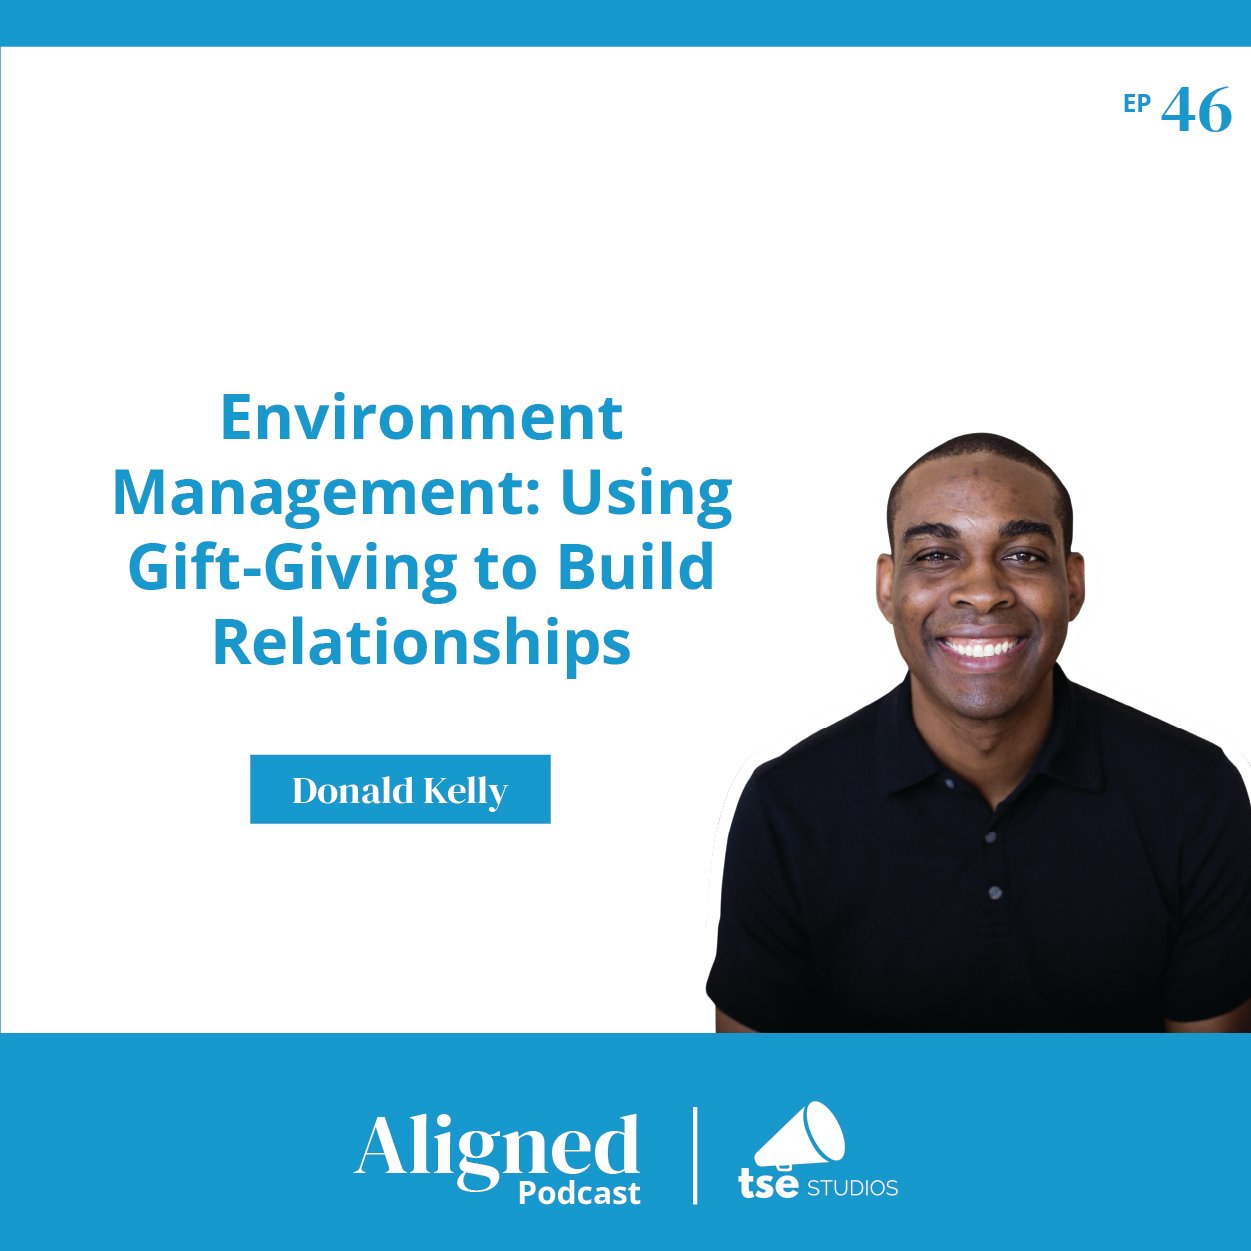 Environment Management: Using Gift-Giving to Build Relationships